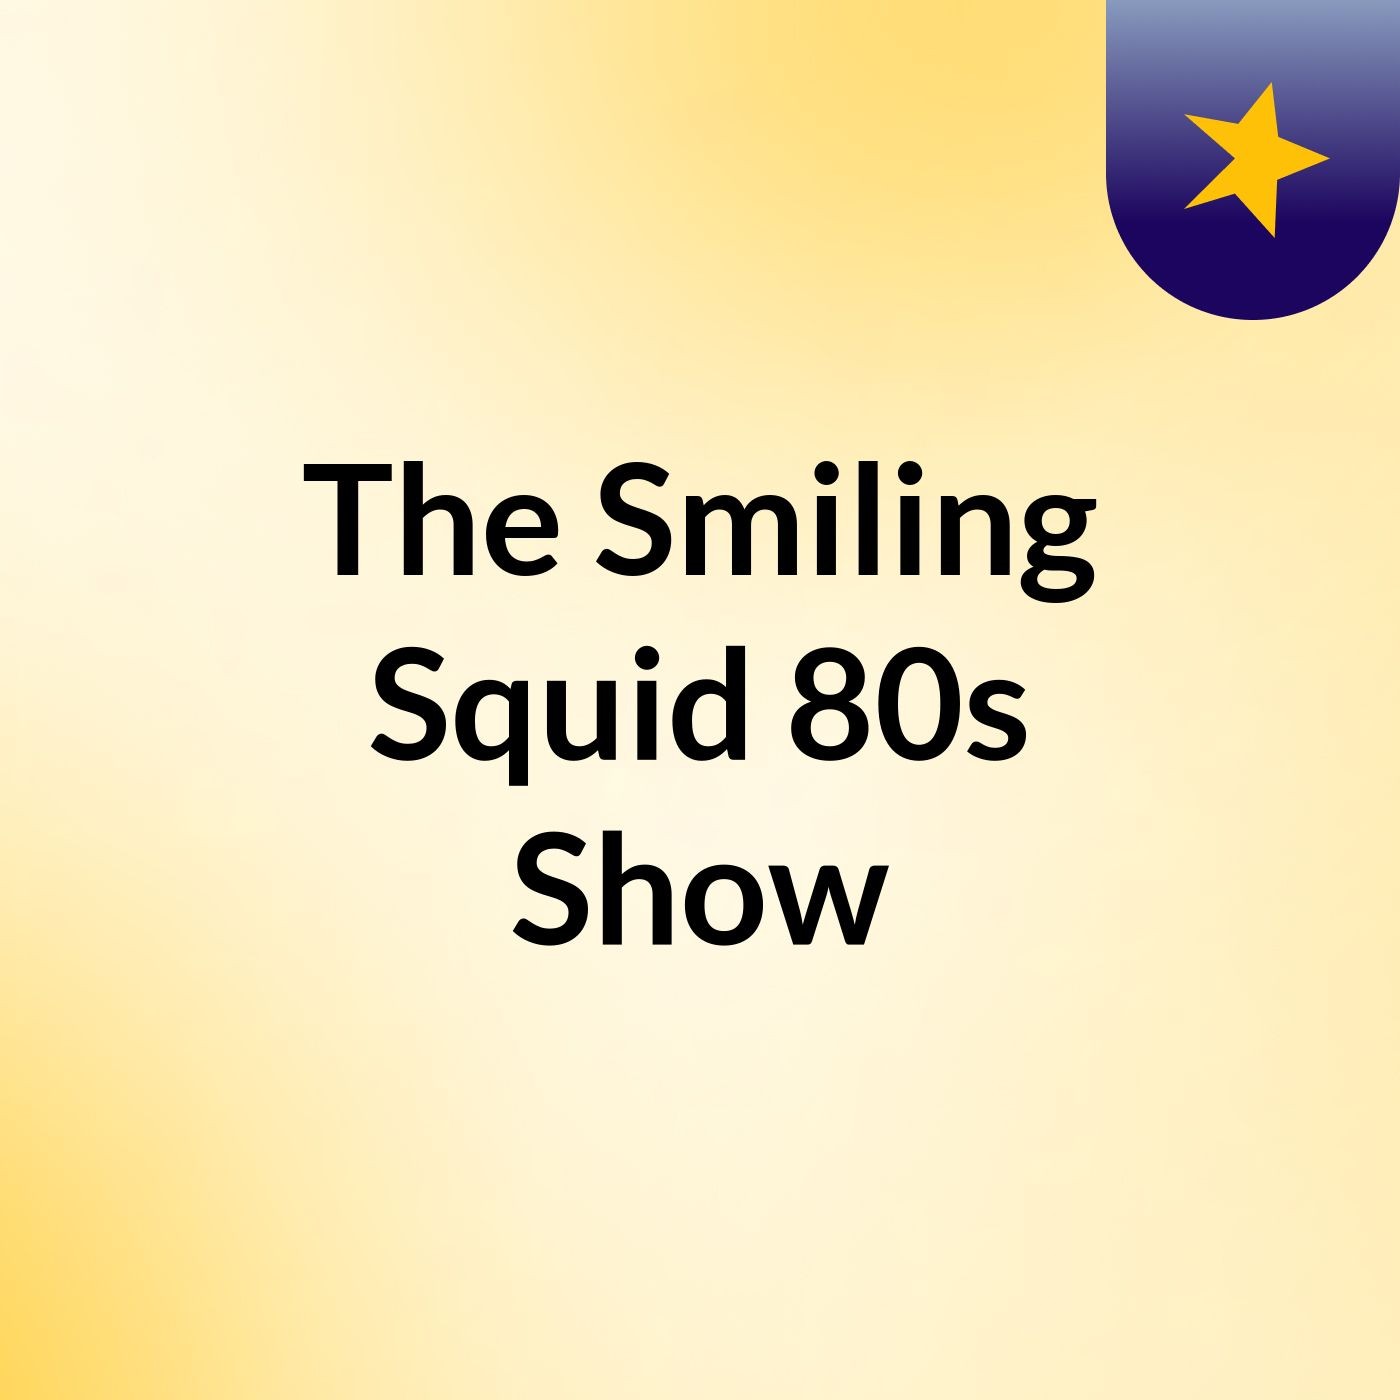 The Smiling Squid 80s Show